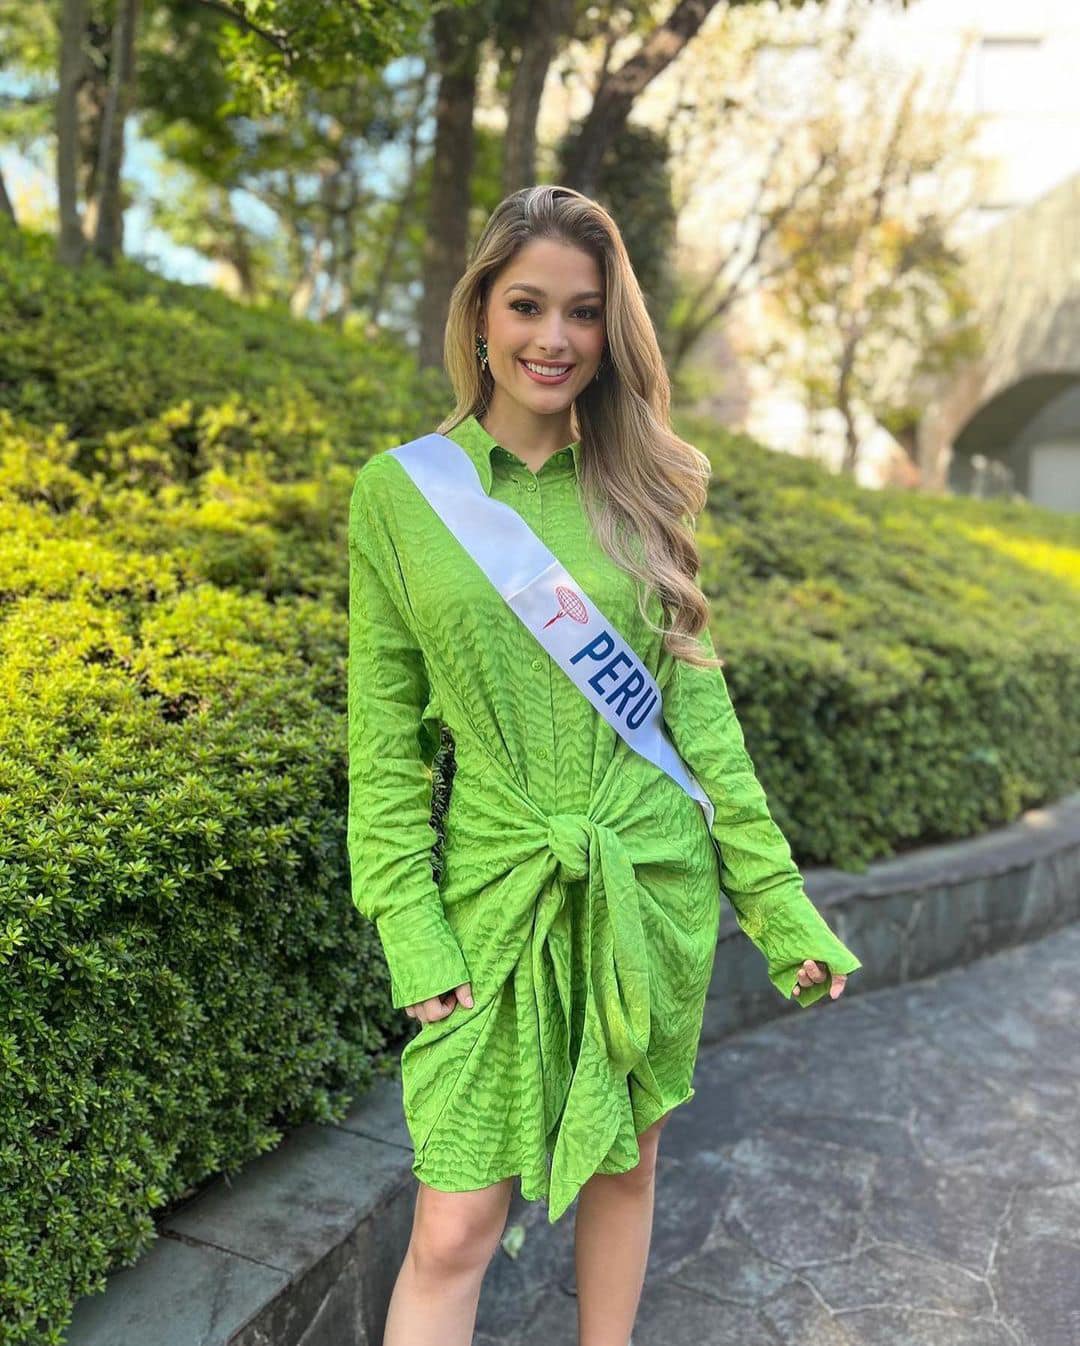 ♔♔♔♔♔ ROAD TO MISS INTERNATIONAL 2023 ♔♔♔♔♔ - Page 4 38705810